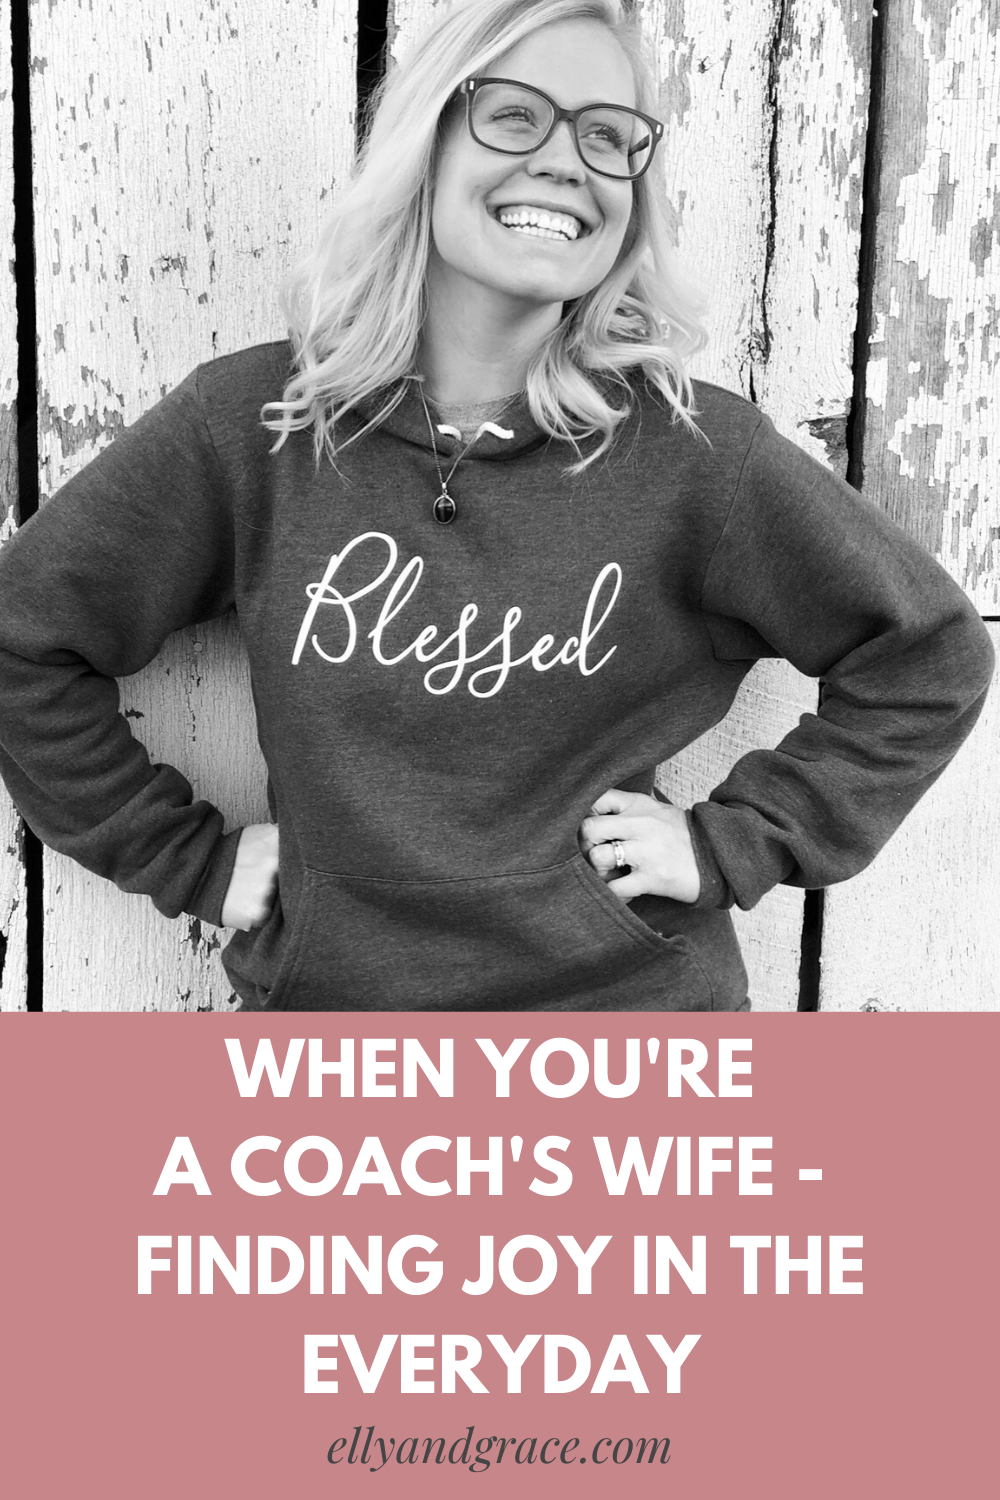 When You're a Coach's Wife